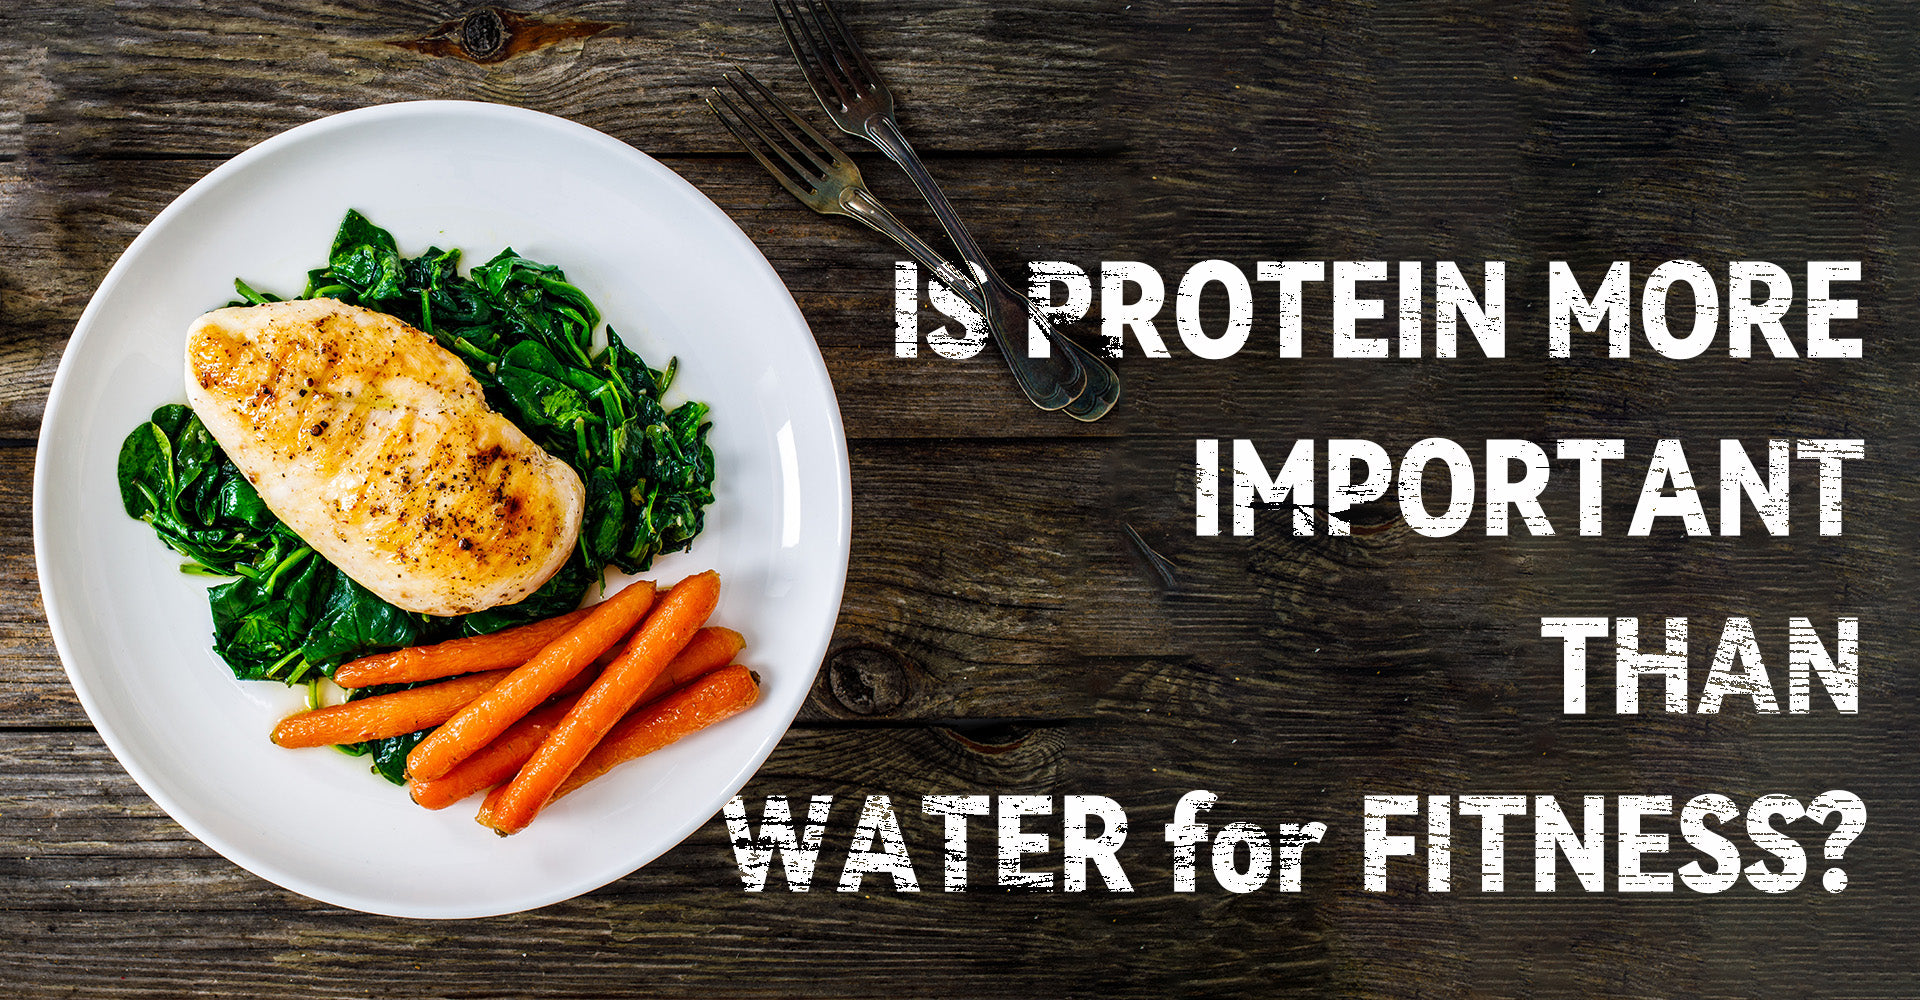 Is Protein More Important Than Water for Fitness?